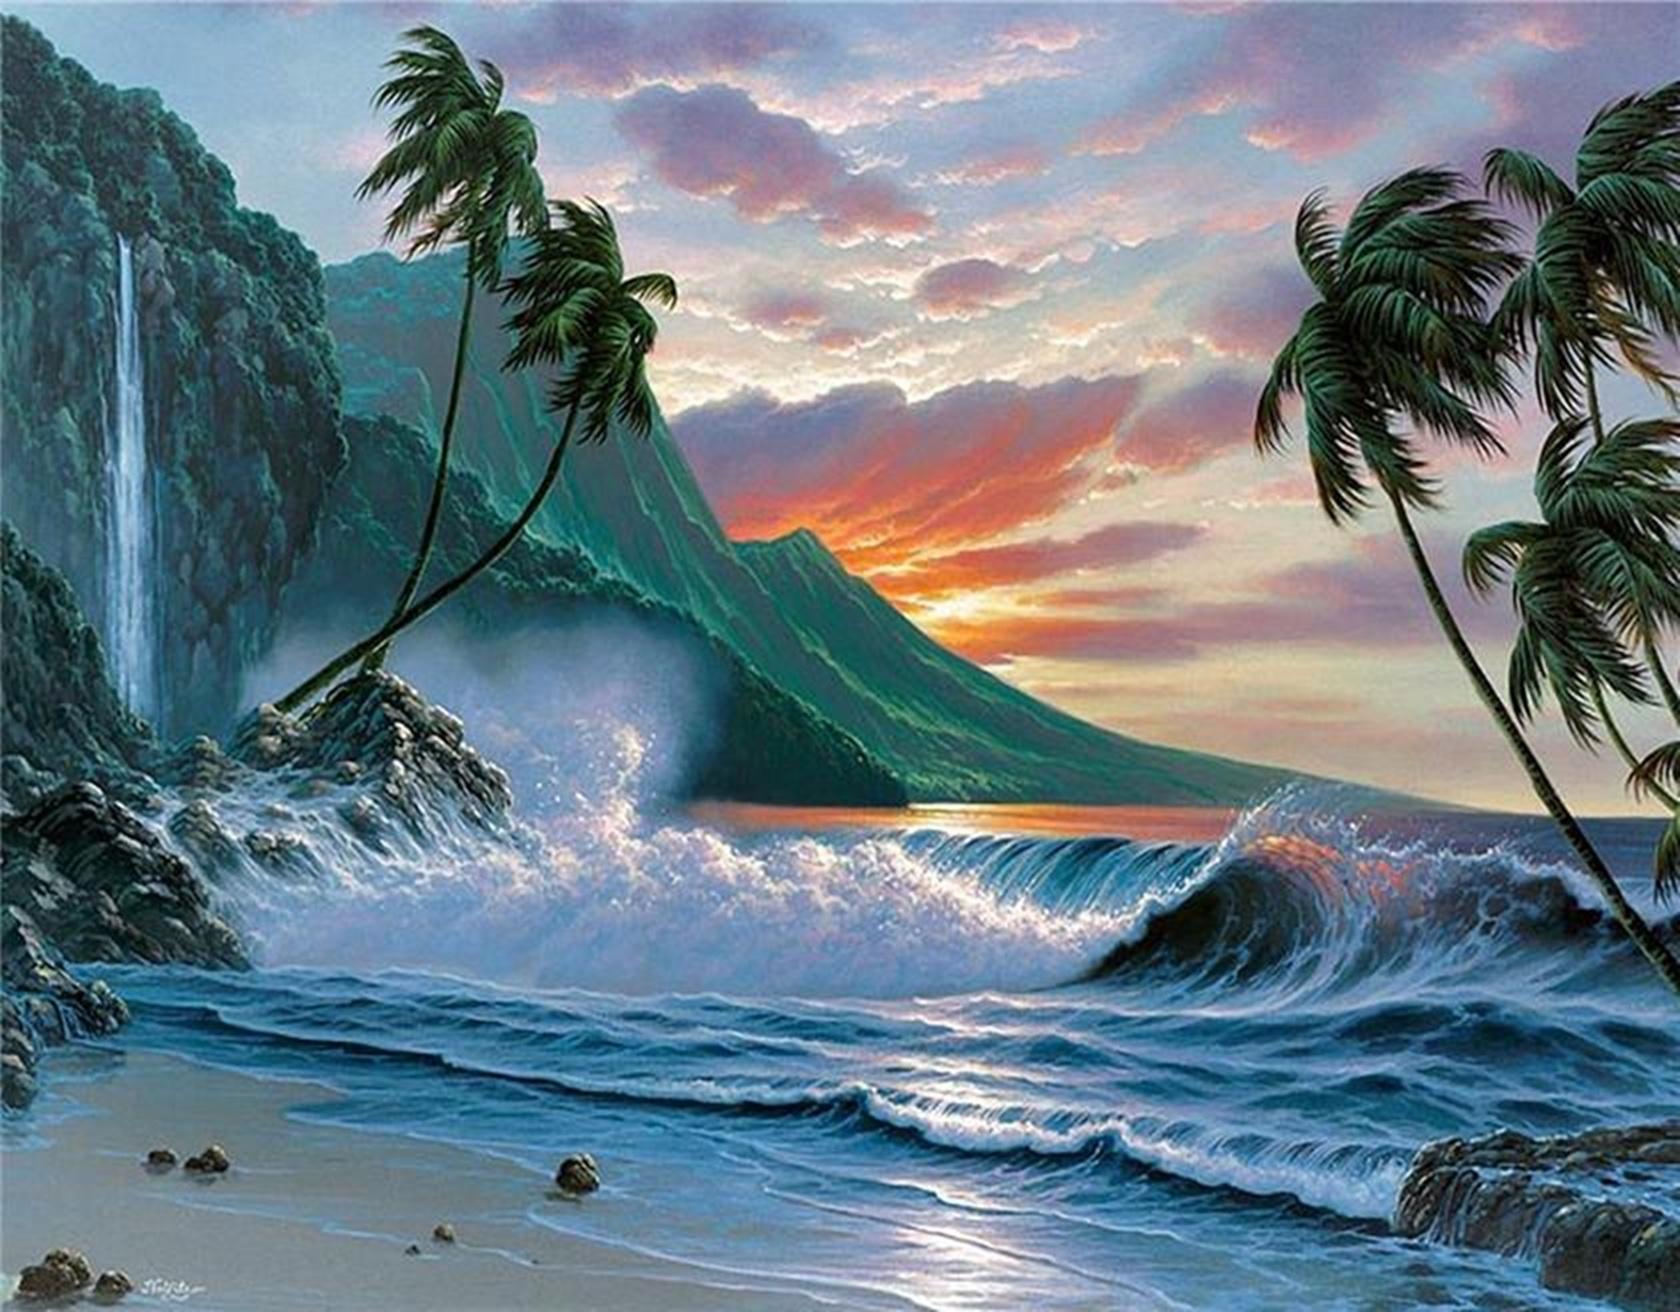 Download mobile wallpaper Fantasy, Sunset, Beach, Mountain, Ocean, Painting, Artistic, Tropical, Wave, Palm Tree for free.